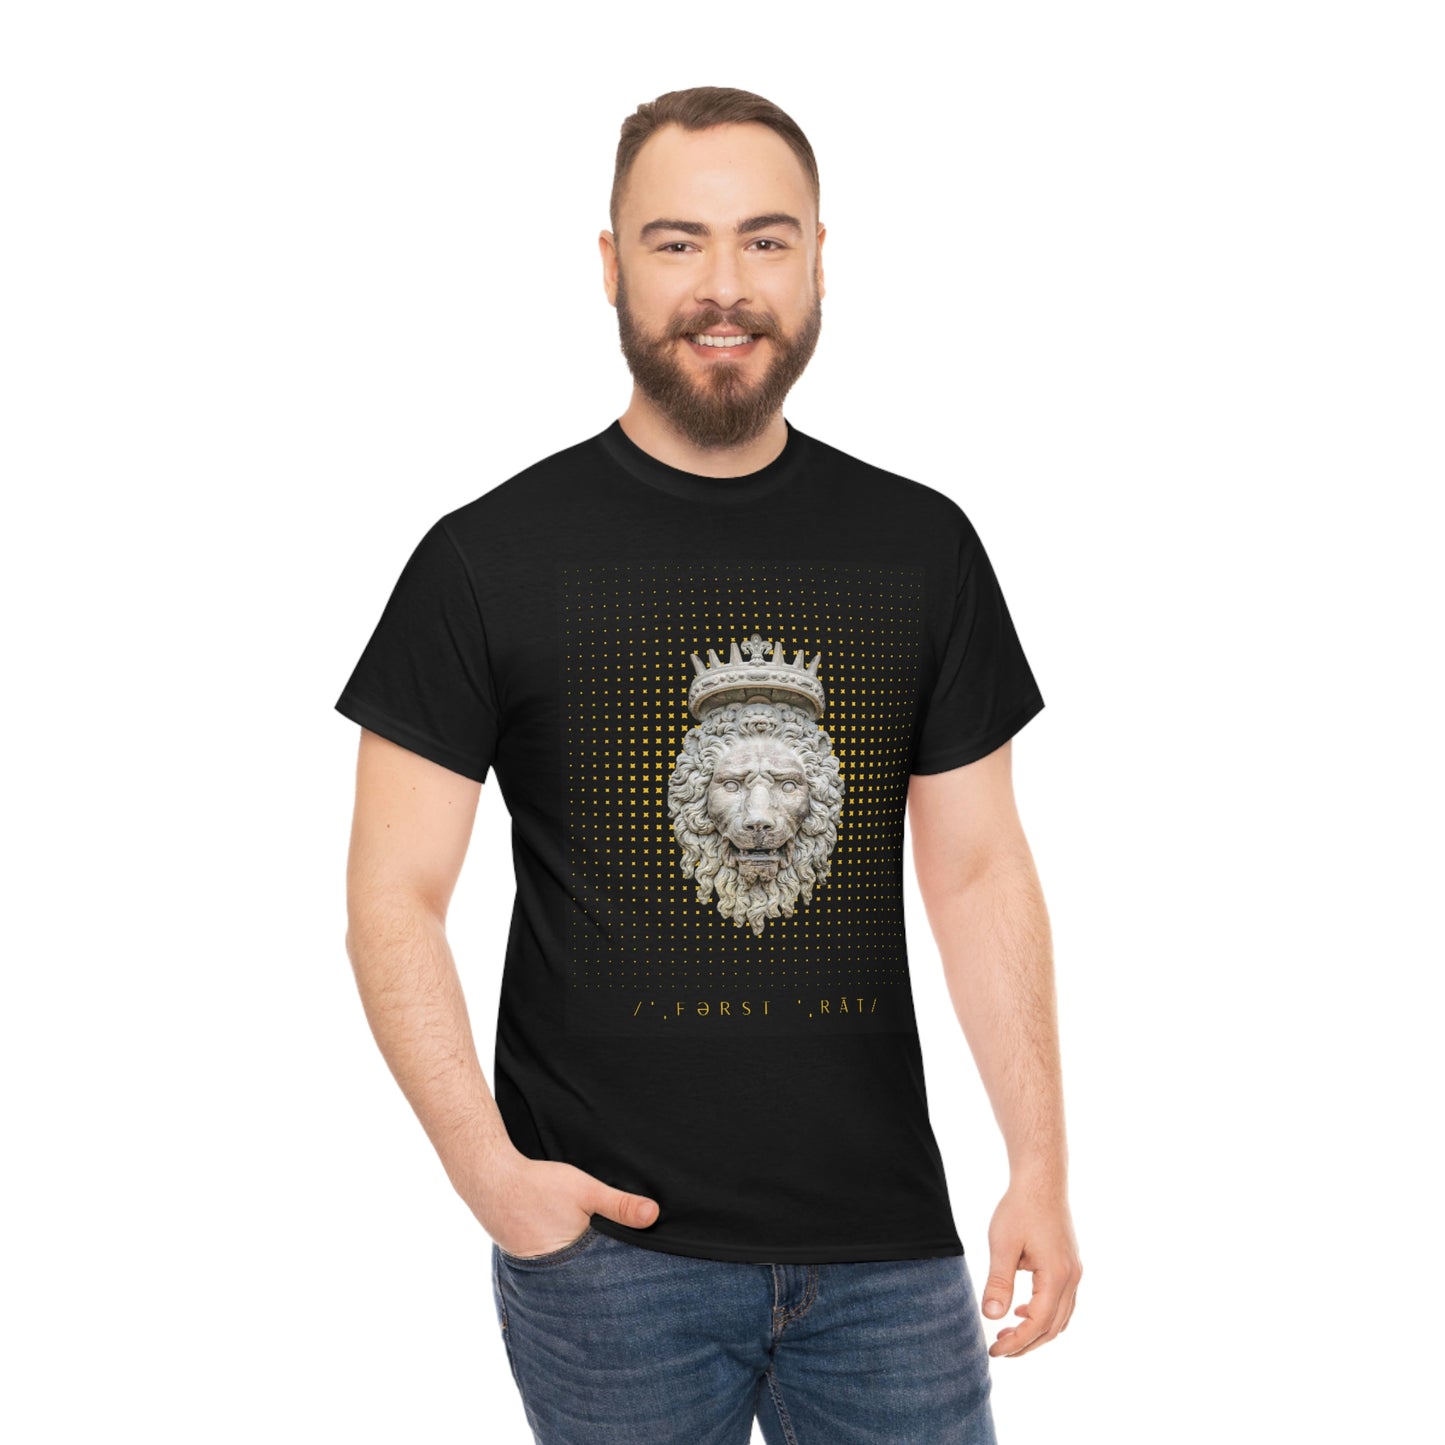 FIRST RATE KING T-SHIRT